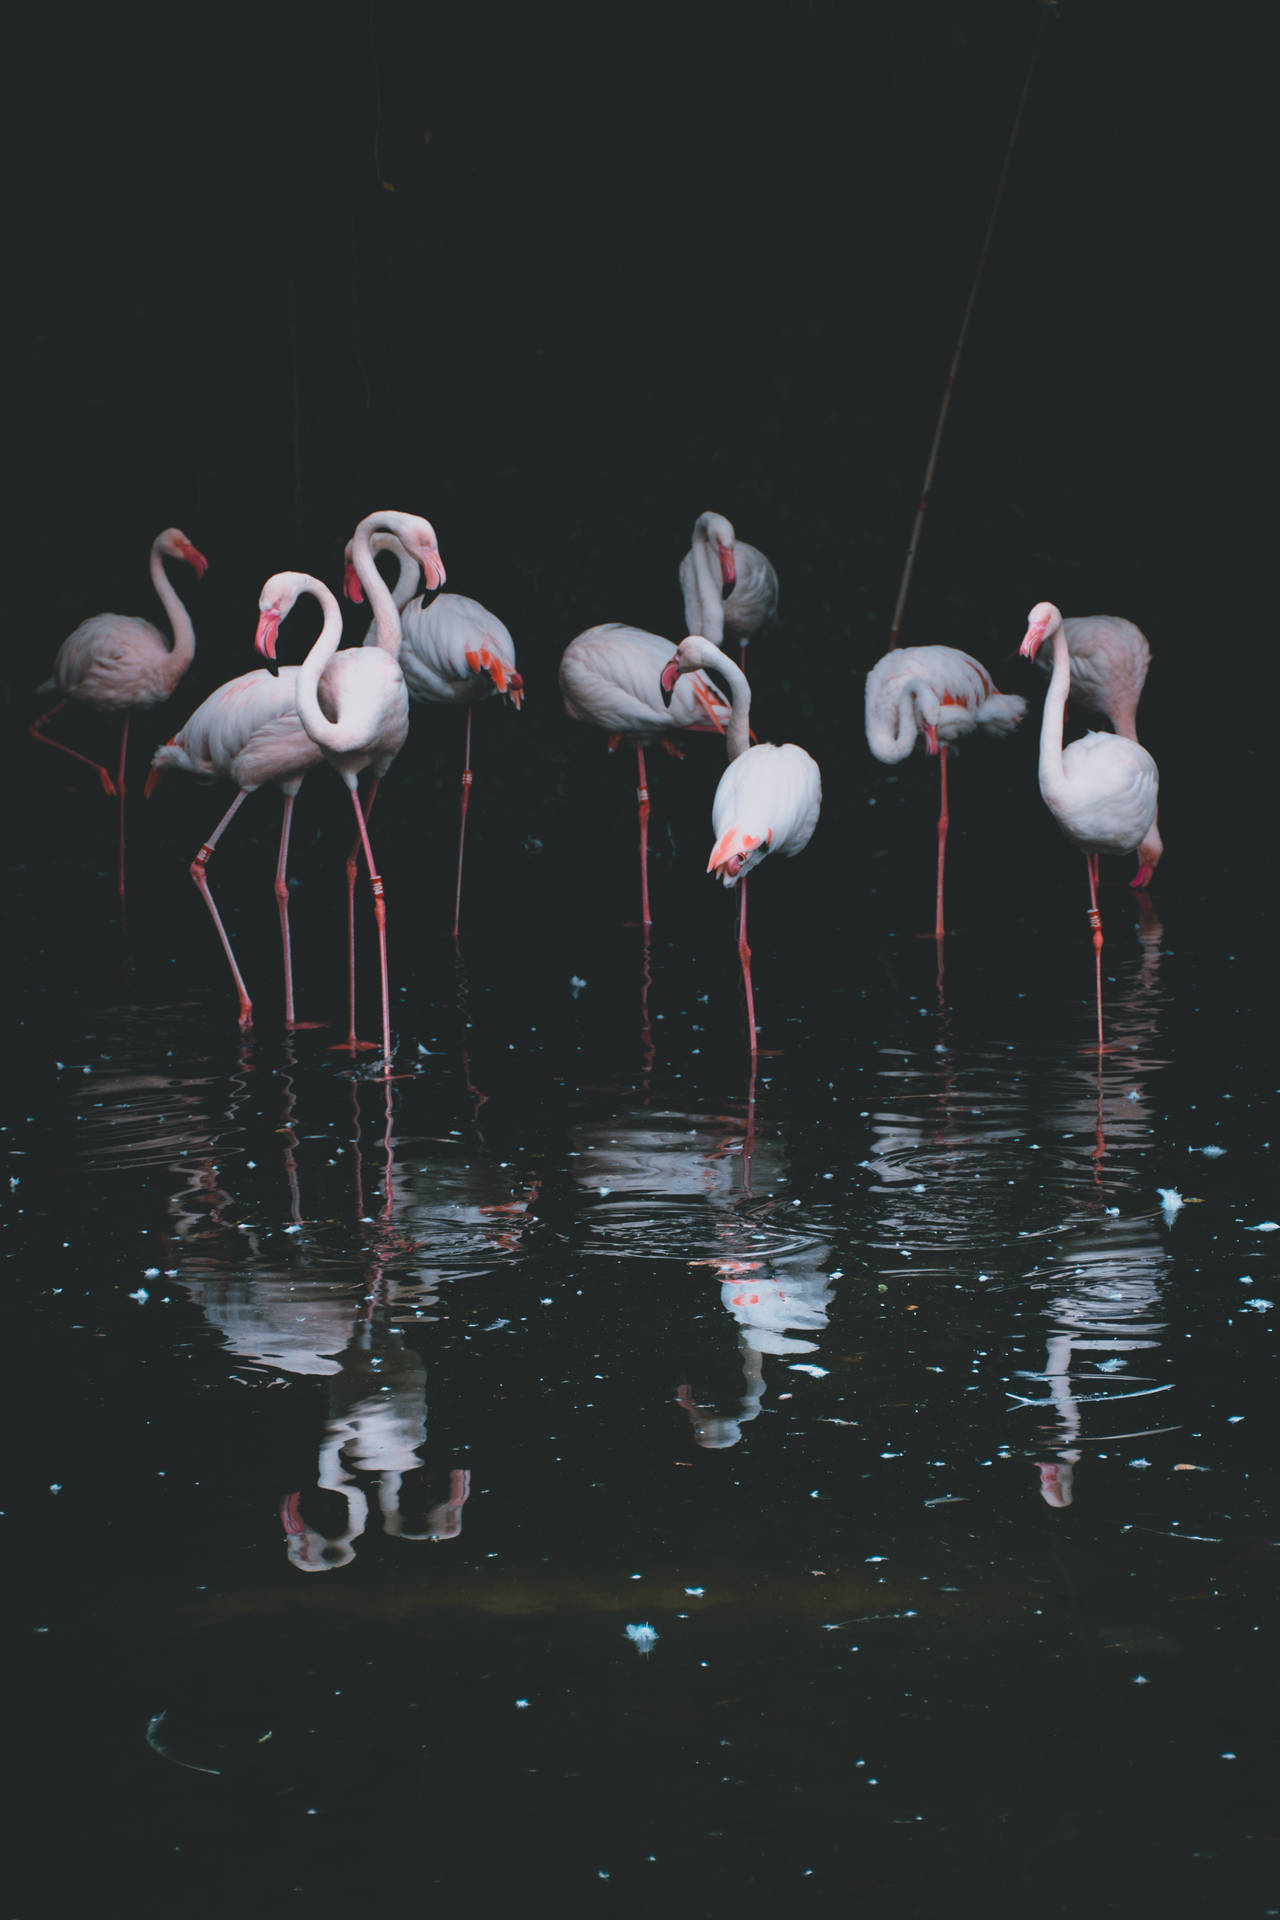 Flamingo 3619X5429 Wallpaper and Background Image